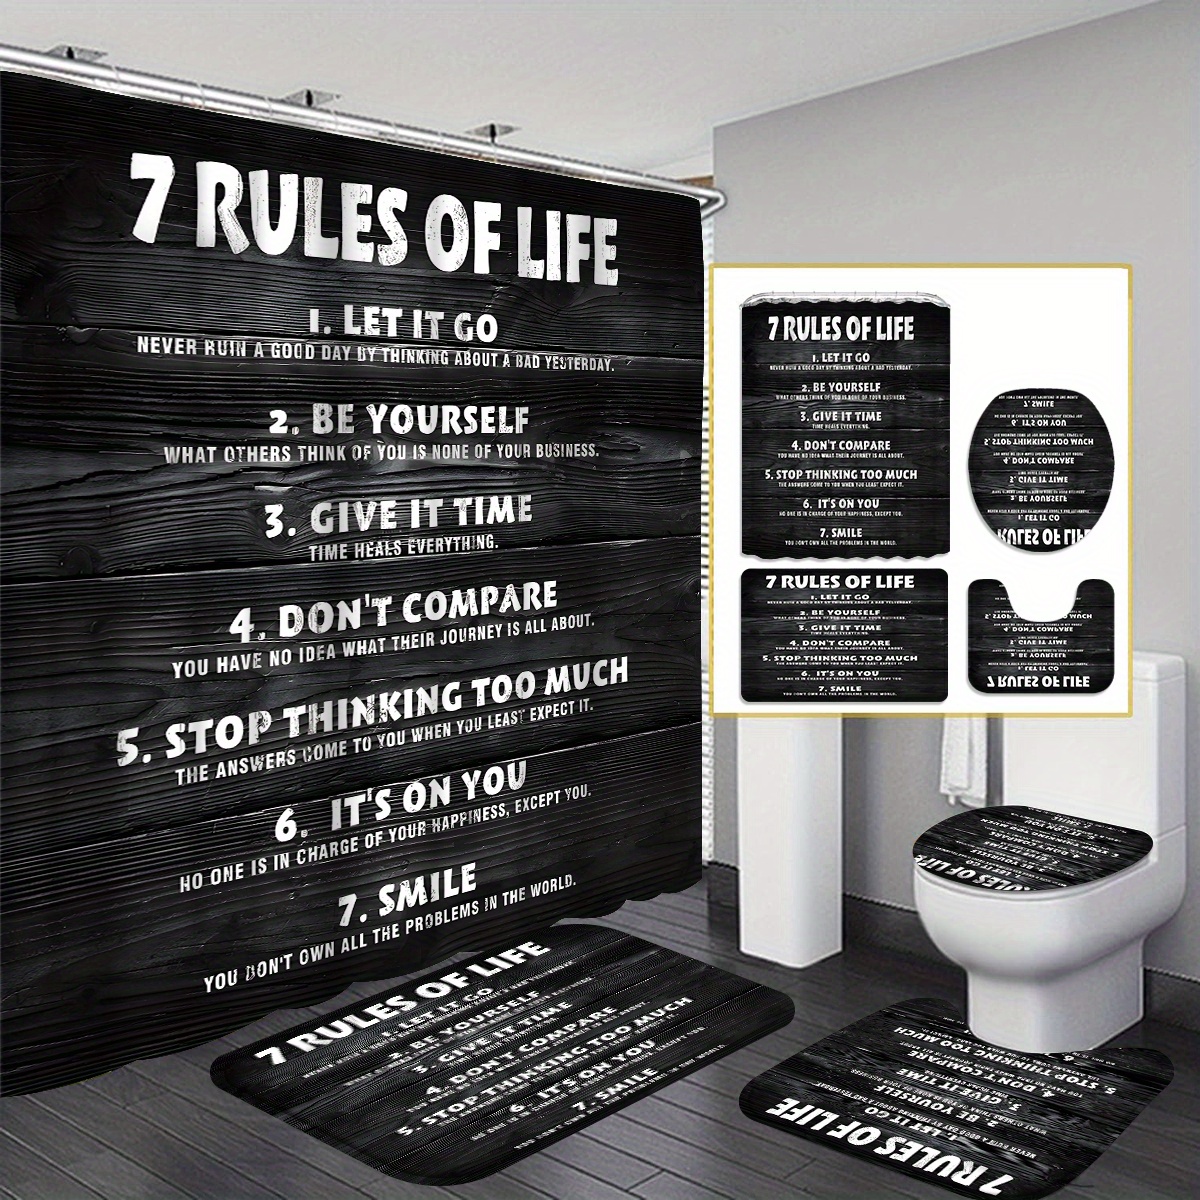 

1pc/4pc Motivational "7 Rules Of Life" Shower Curtain Set, 70.8x70.8 Inches, Modern Bathroom Decor With Bath Mat & Toilet Lid Cover, Includes 12 Curtain Hooks